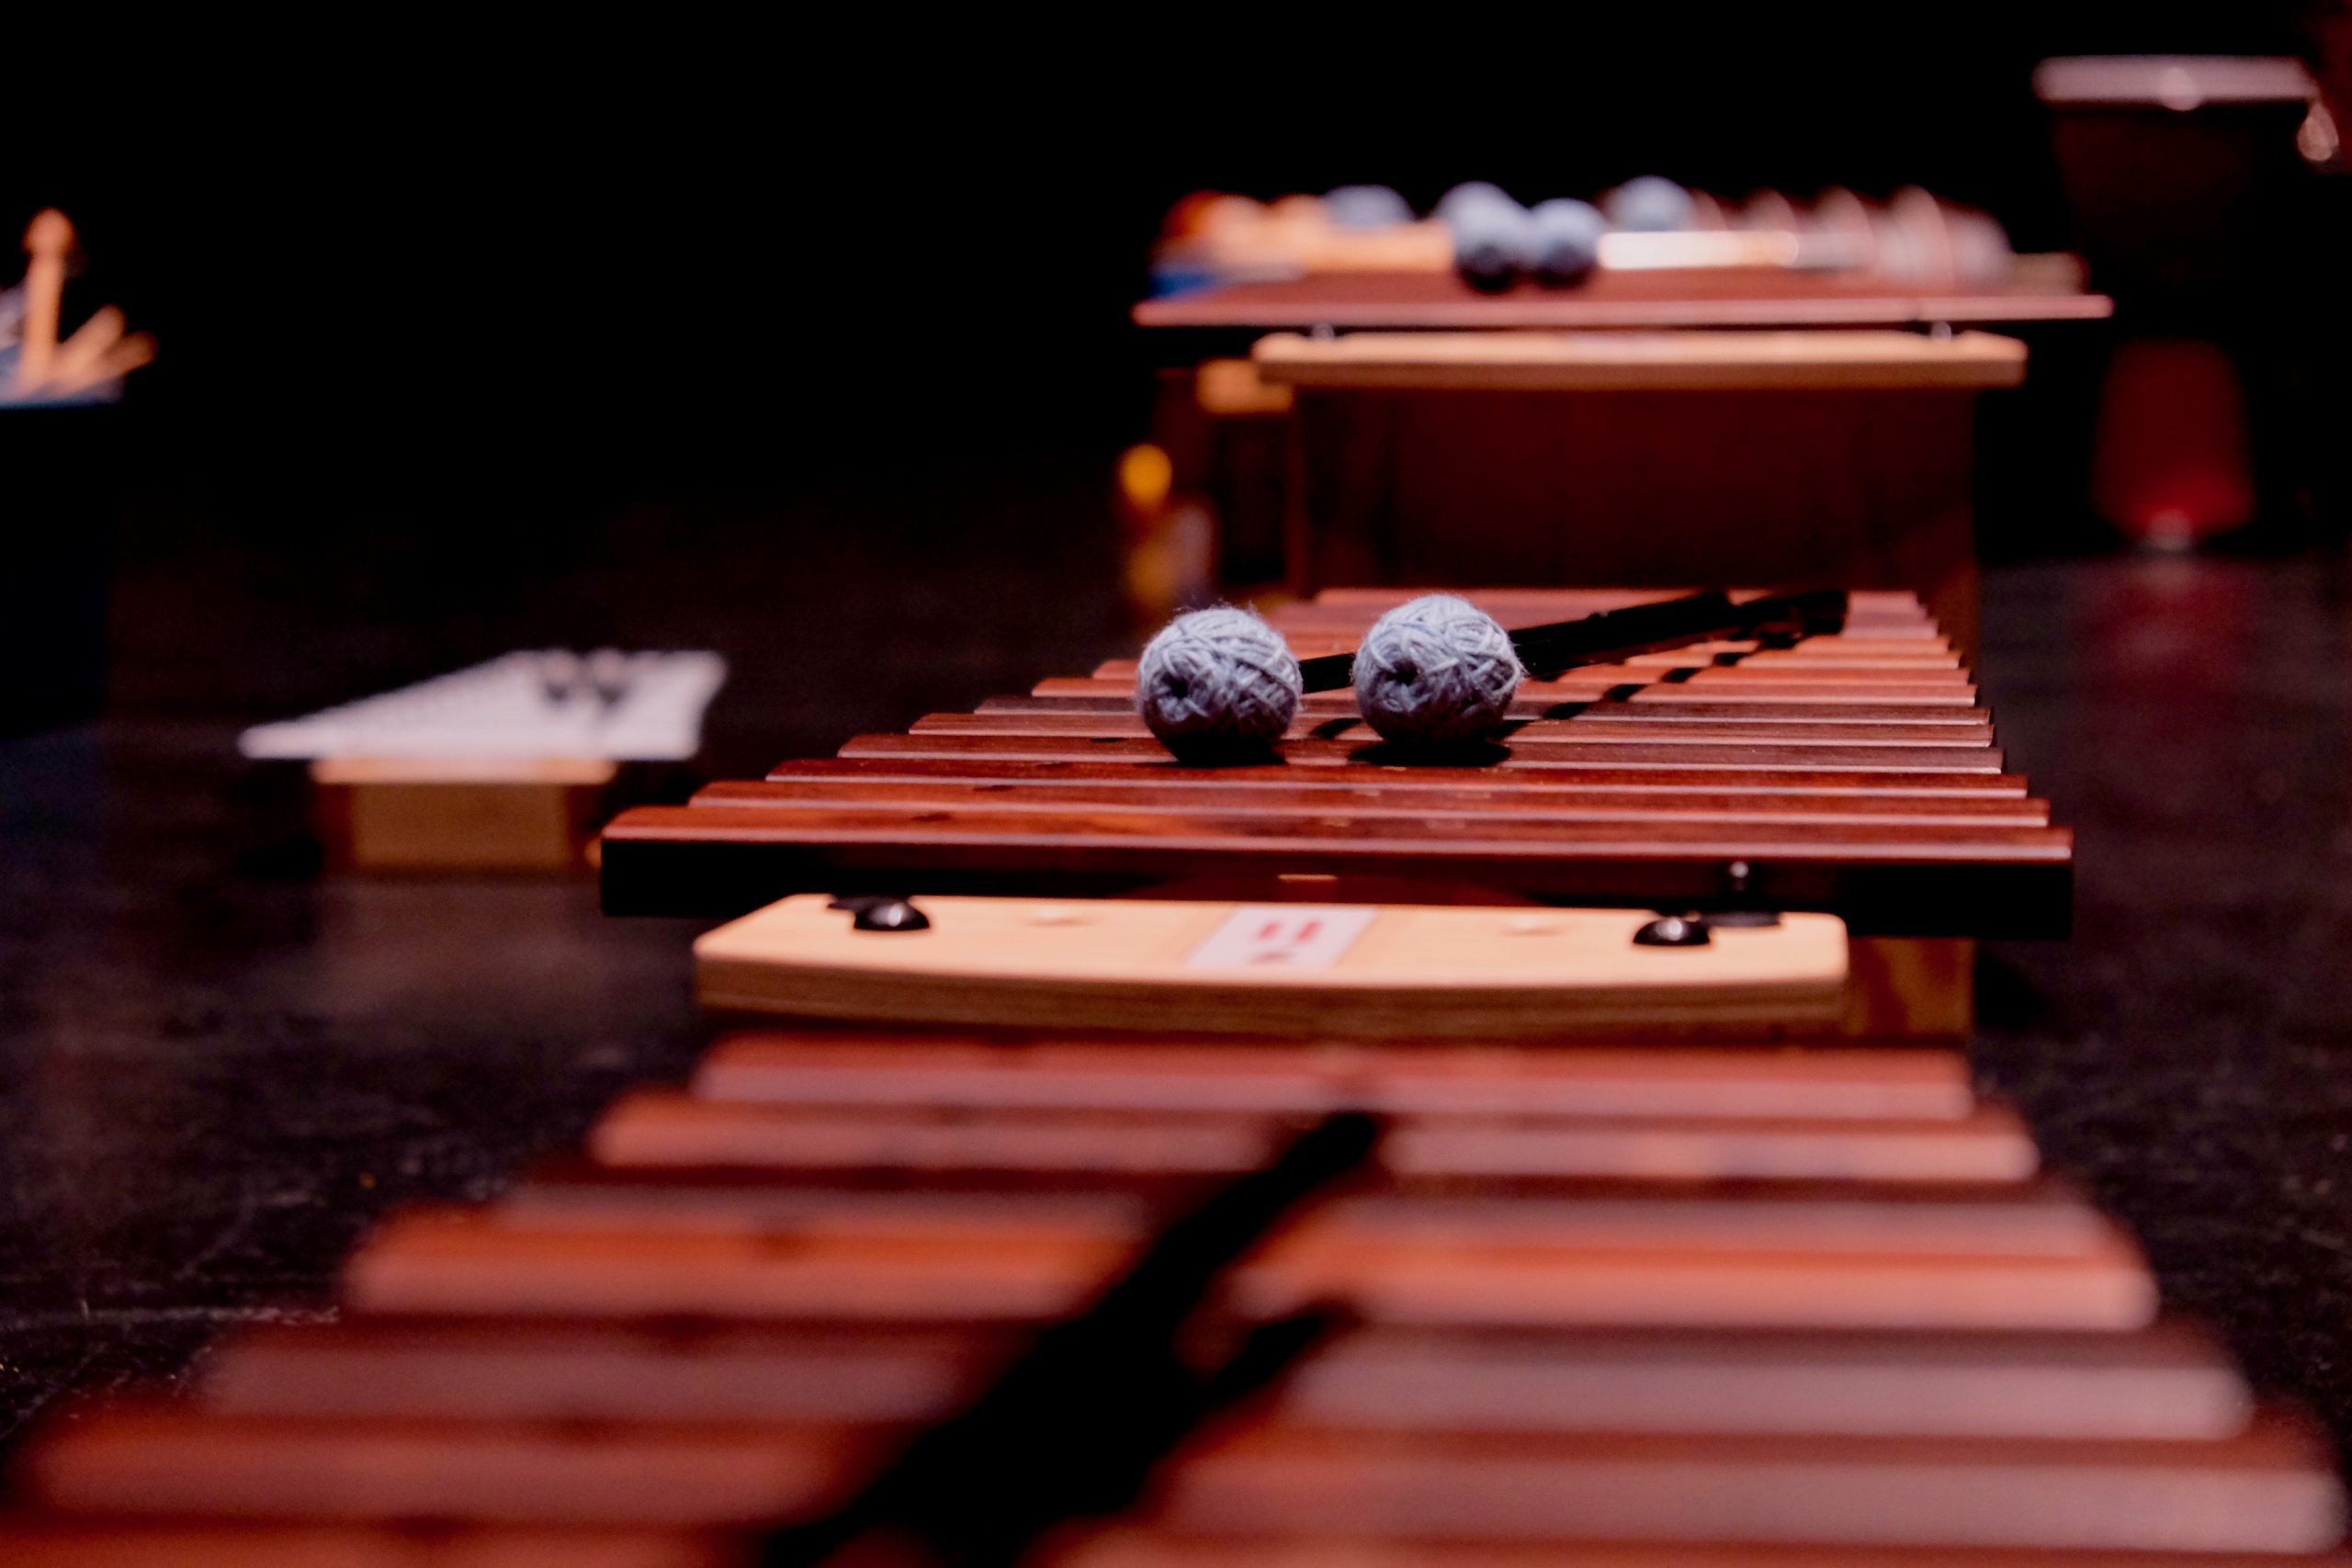 A Xylophone